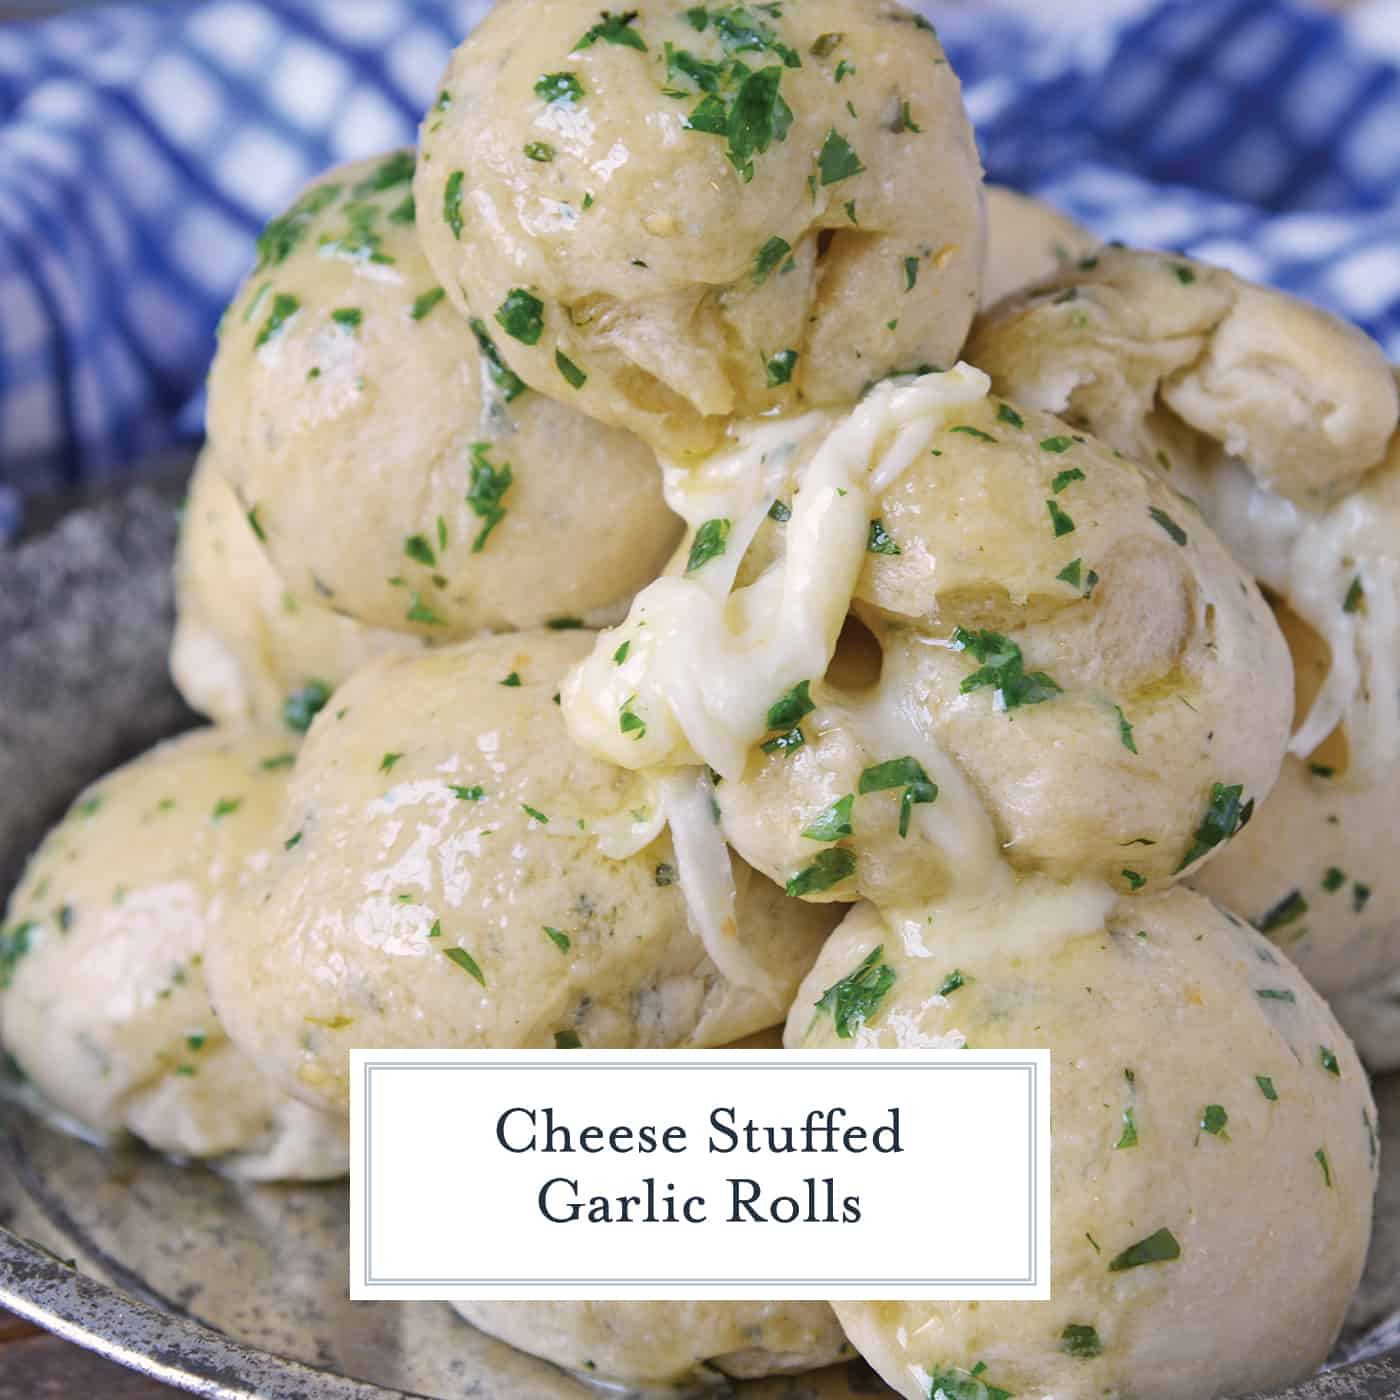 These Cheese Stuffed Garlic Rolls are delicious garlic and parsley rolls stuffed with gooey mozzarella cheese. Eat them plain or with a side of marinara.